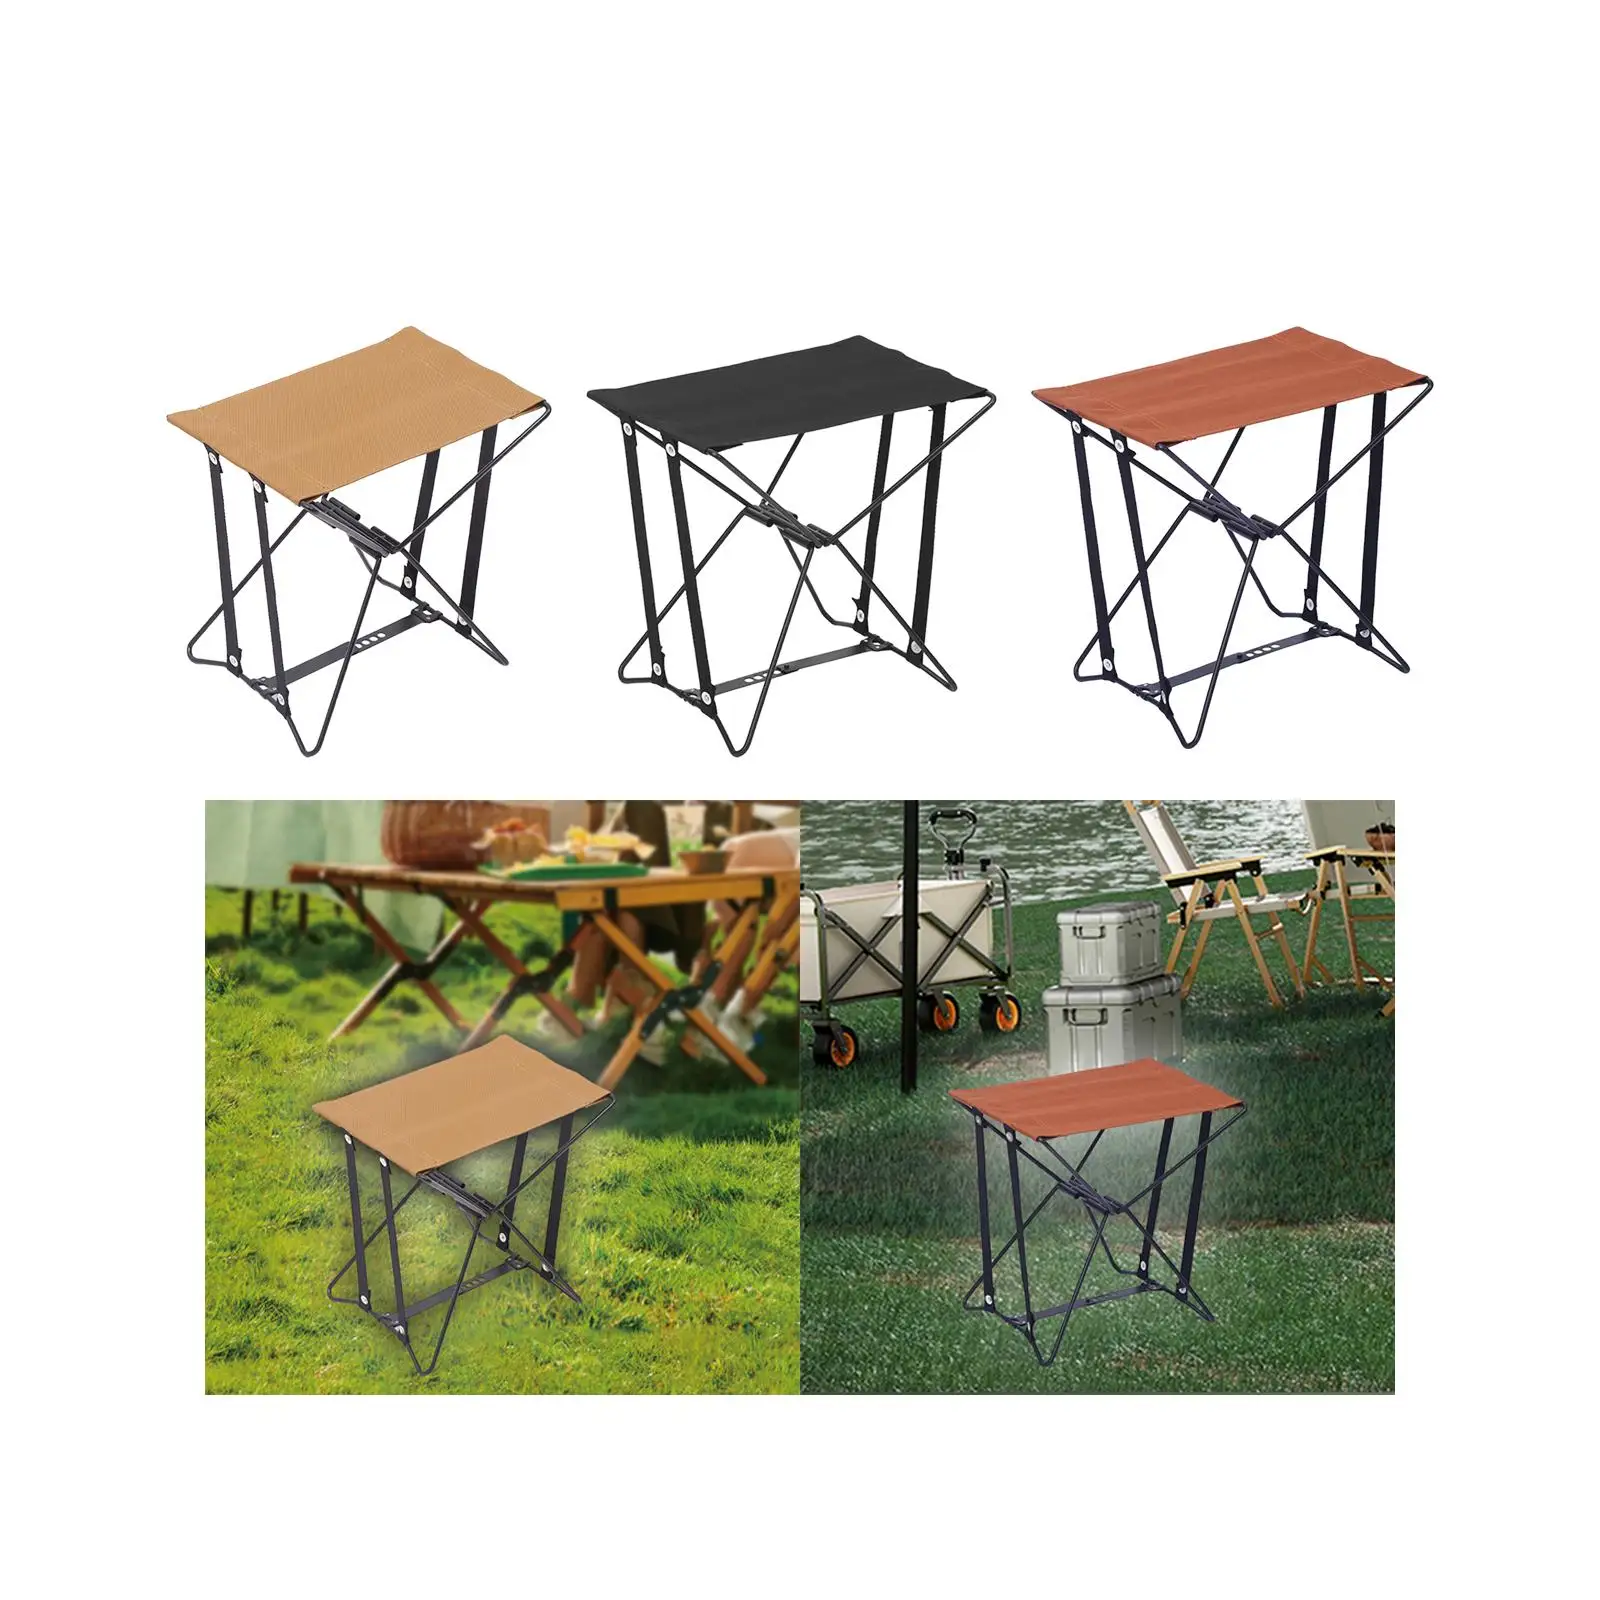 Camping Stool Foot Stool Seat Portable Folding Stool Fishing Chair Collapsible Stool for Travel Backpacking Beach Patio Festival